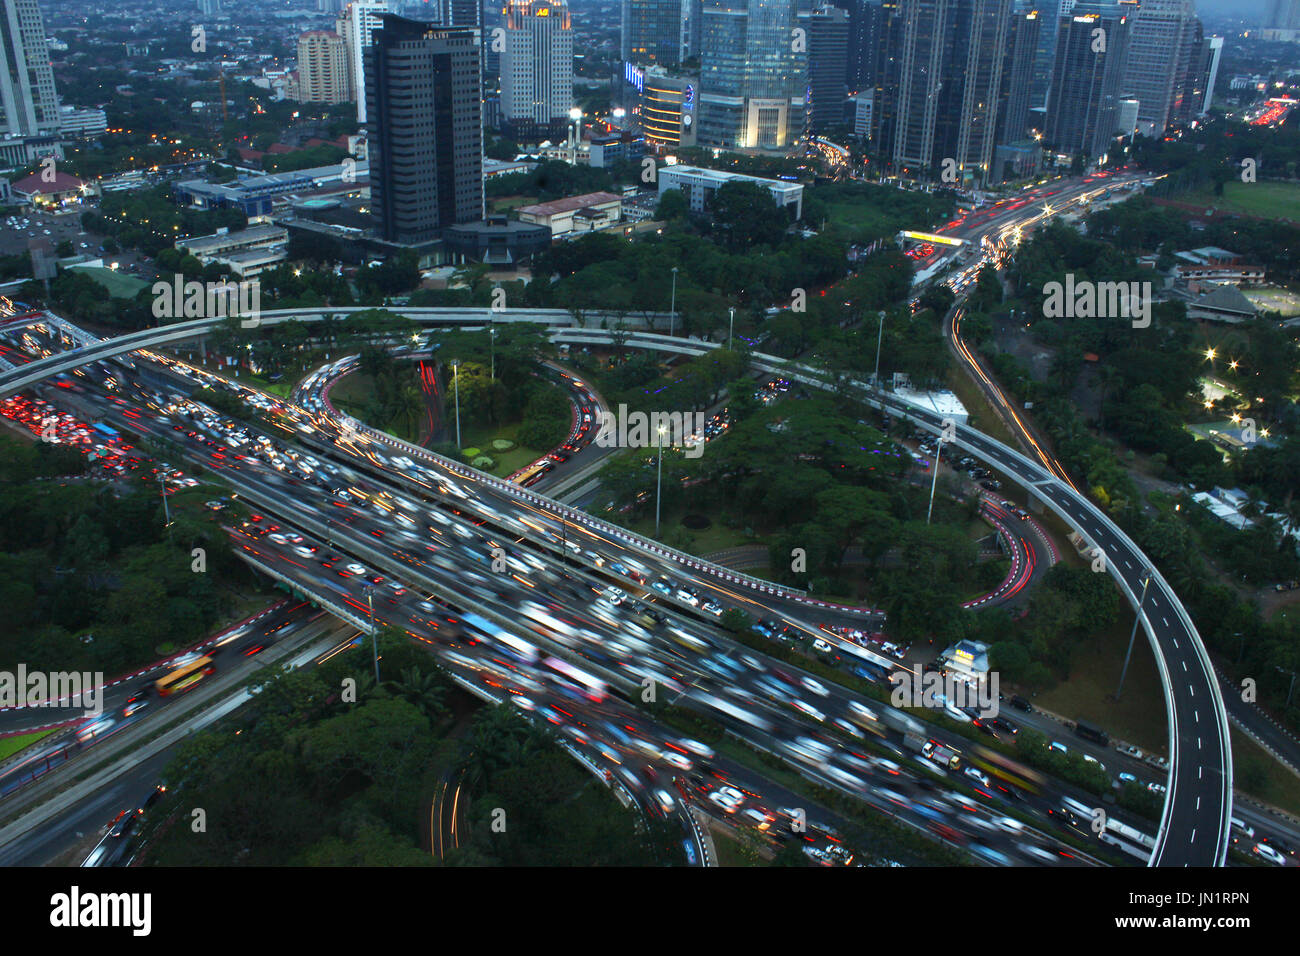 Semanggi interchanges bridge, Jakarta, which has completed the construction process and began the traffic test phase on July 28, 2017 night. The interchanges of Semanggi are a Jakarta Provincial Government project that was built during the leadership of Basuki Tjahaja Purnama as an effort to overcome traffic congestion in the capital city, at least 30%. Groundbreaking this project was conducted by Basuki Tjahaja Purnama, when he was still serving as Governor of Jakarta, on April 8, 2016. The grand launching of Semanggi interchanges is planned to be conducted by President Joko Widodo on August Stock Photo